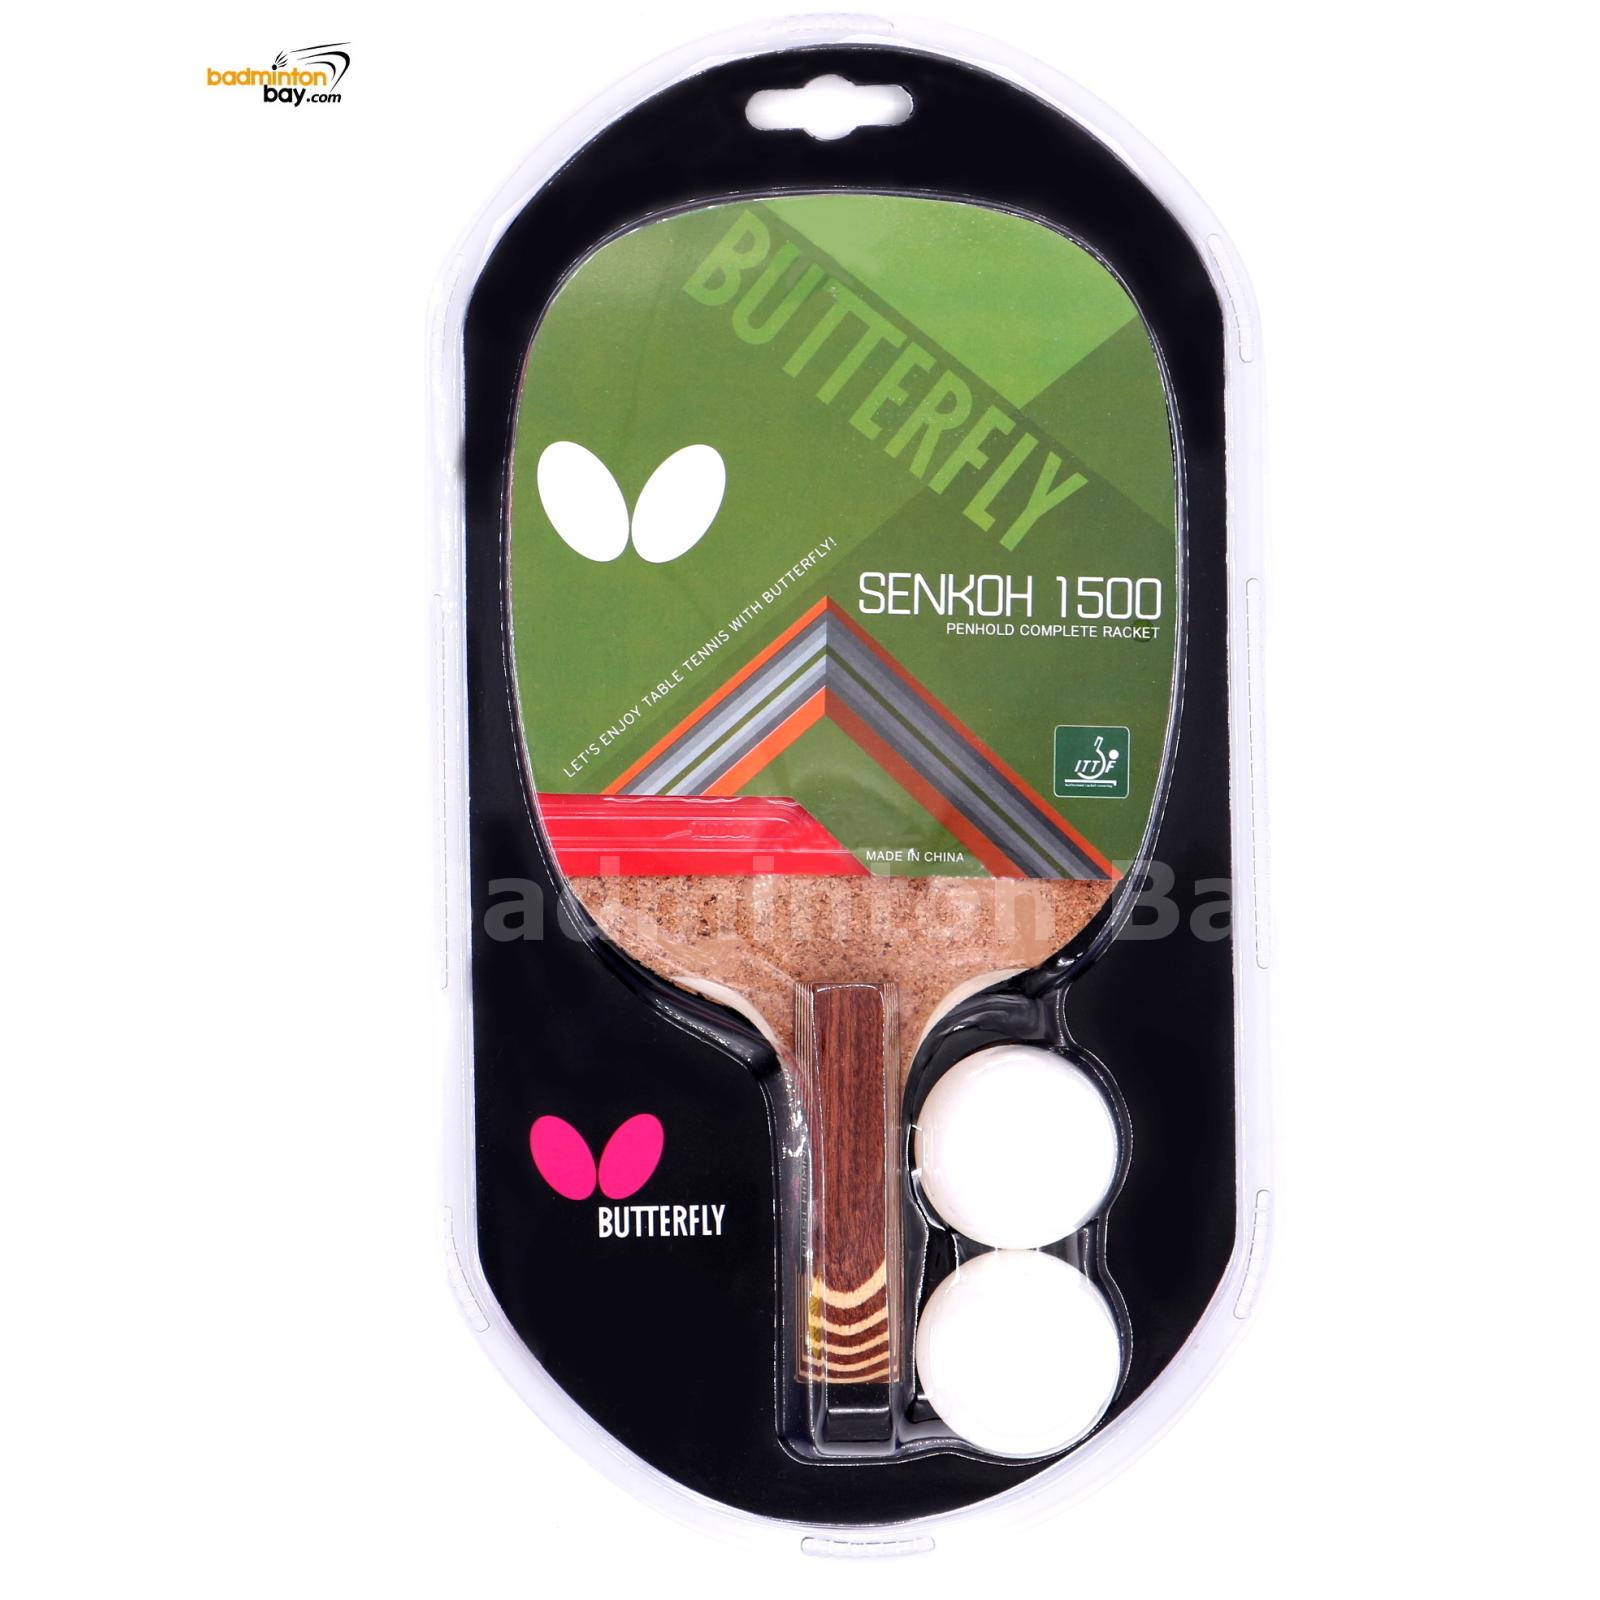 Butterfly Senkoh 1500 Penhold Table Tennis Racket with Rubber and Brown Han 